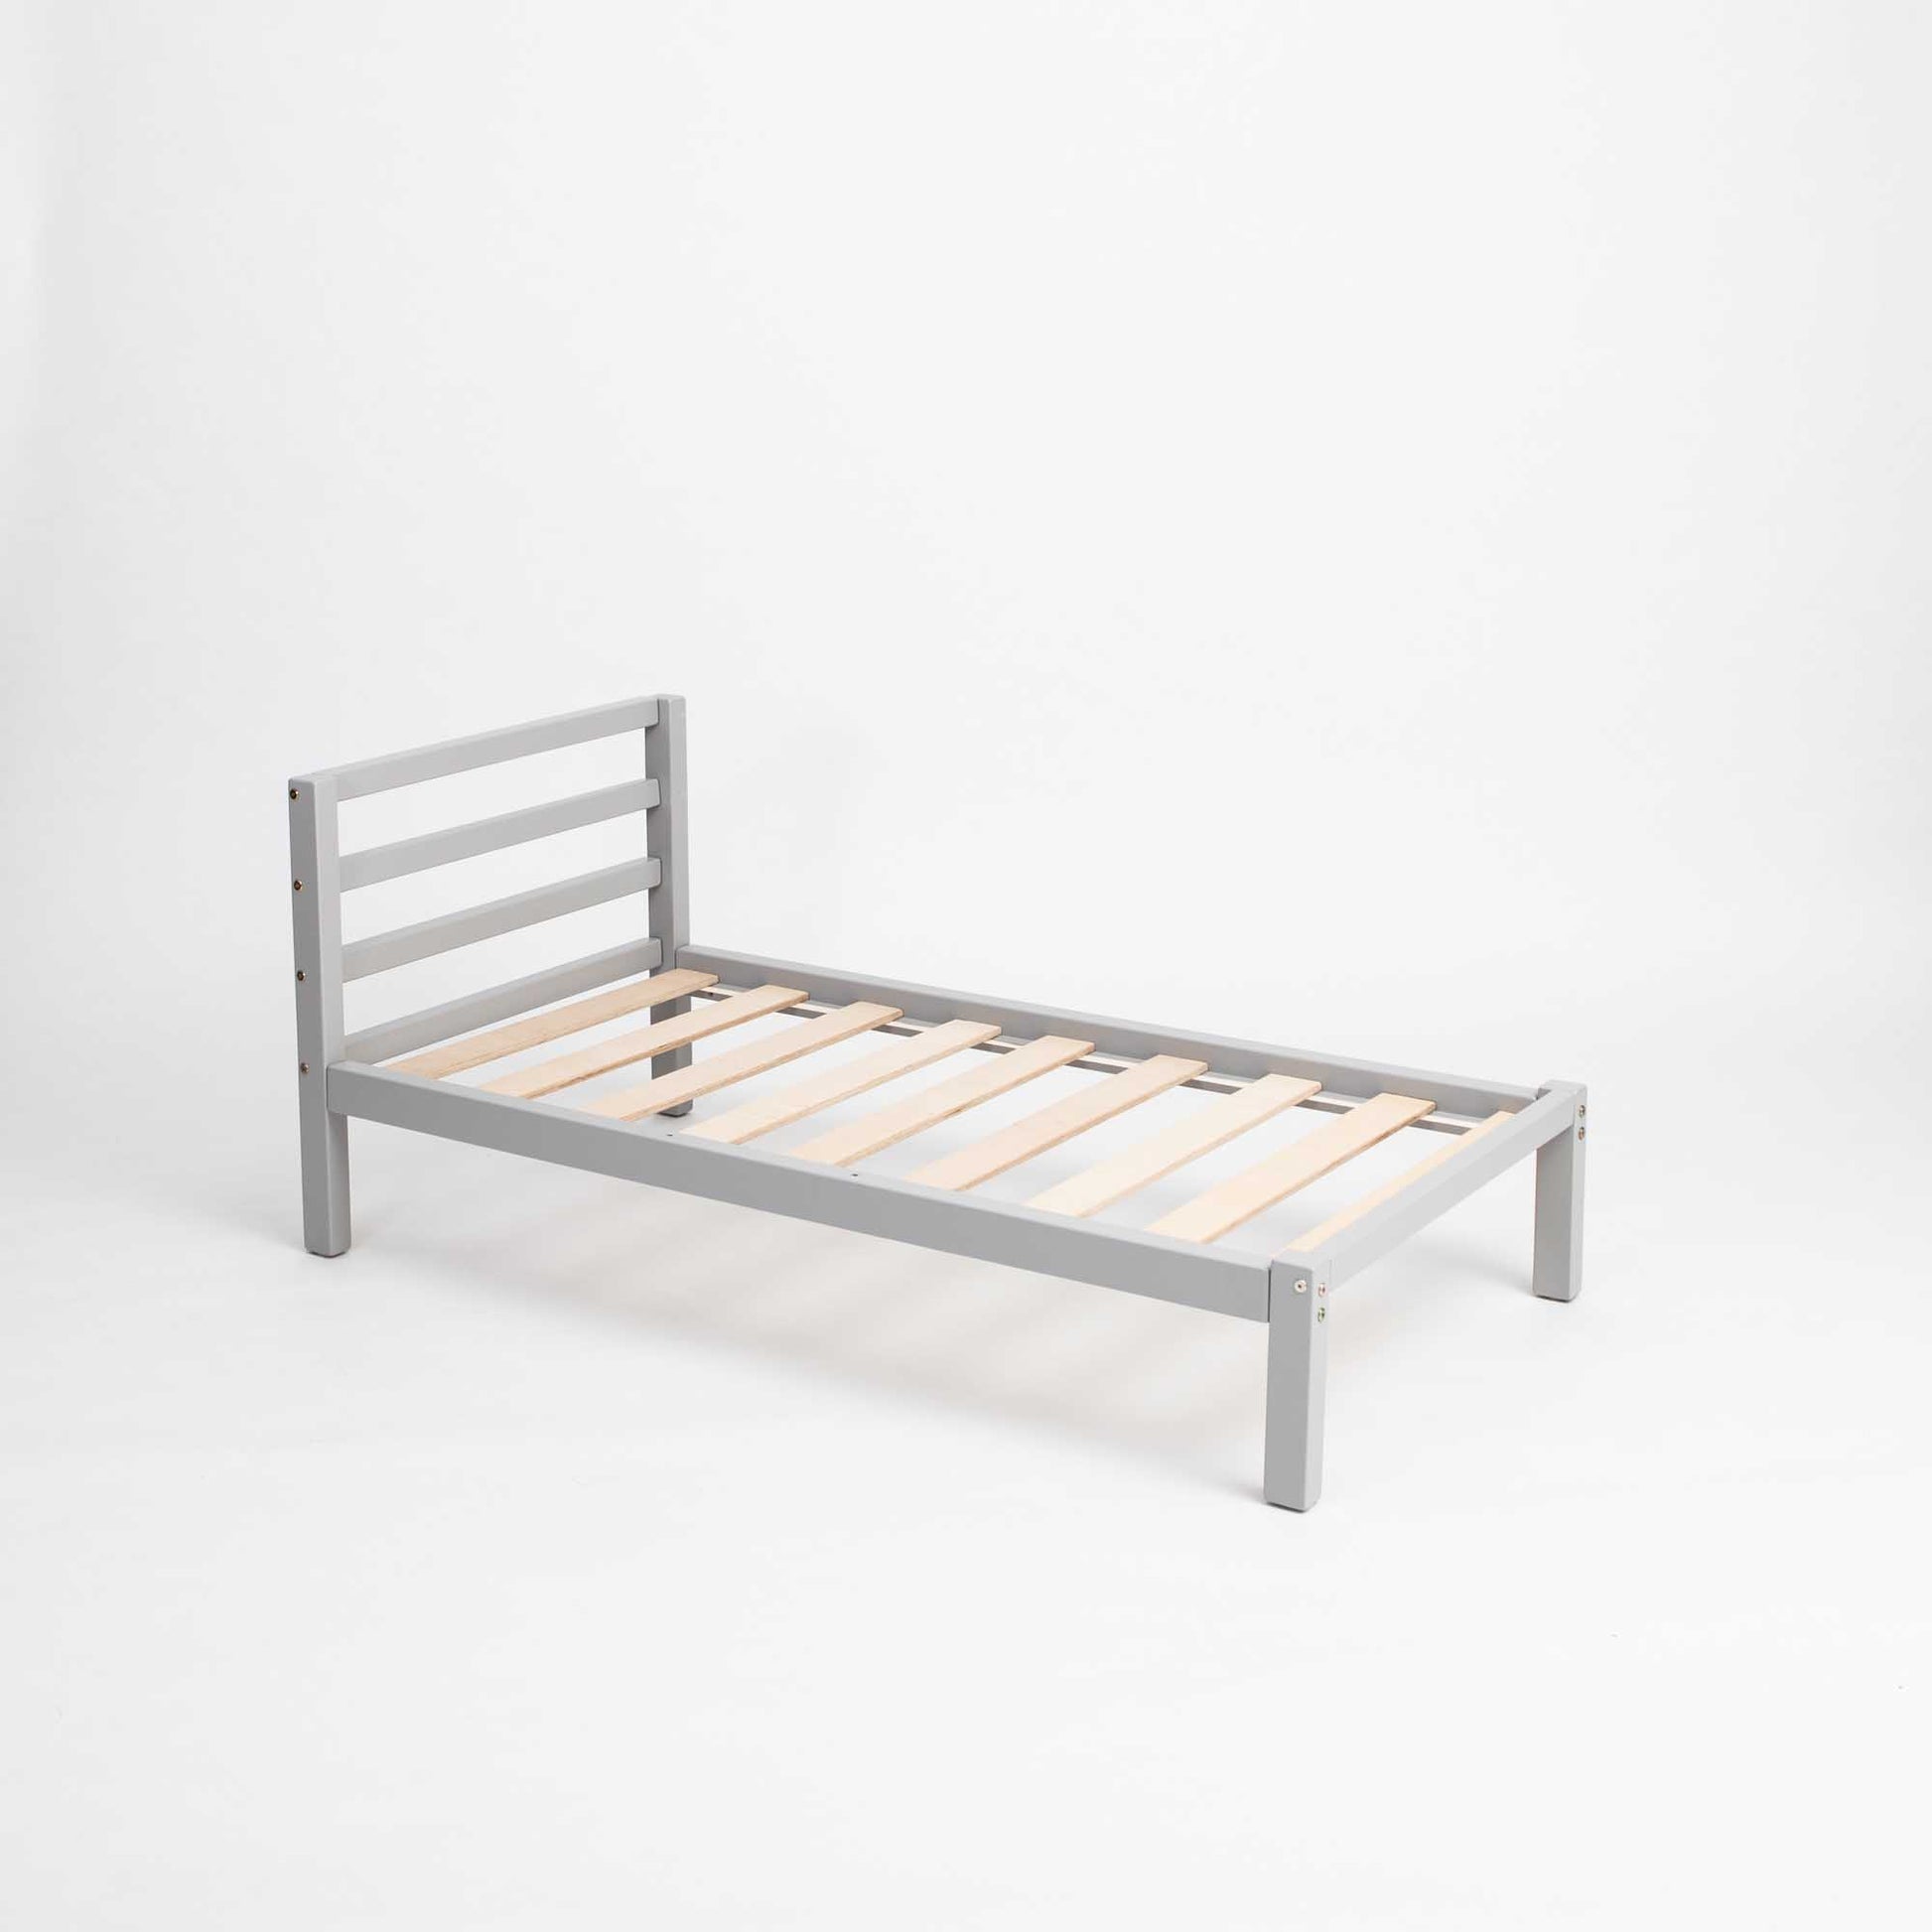 A sturdy, Sweet Home From Wood Montessori-inspired toddler bed with wooden slats on a white background.